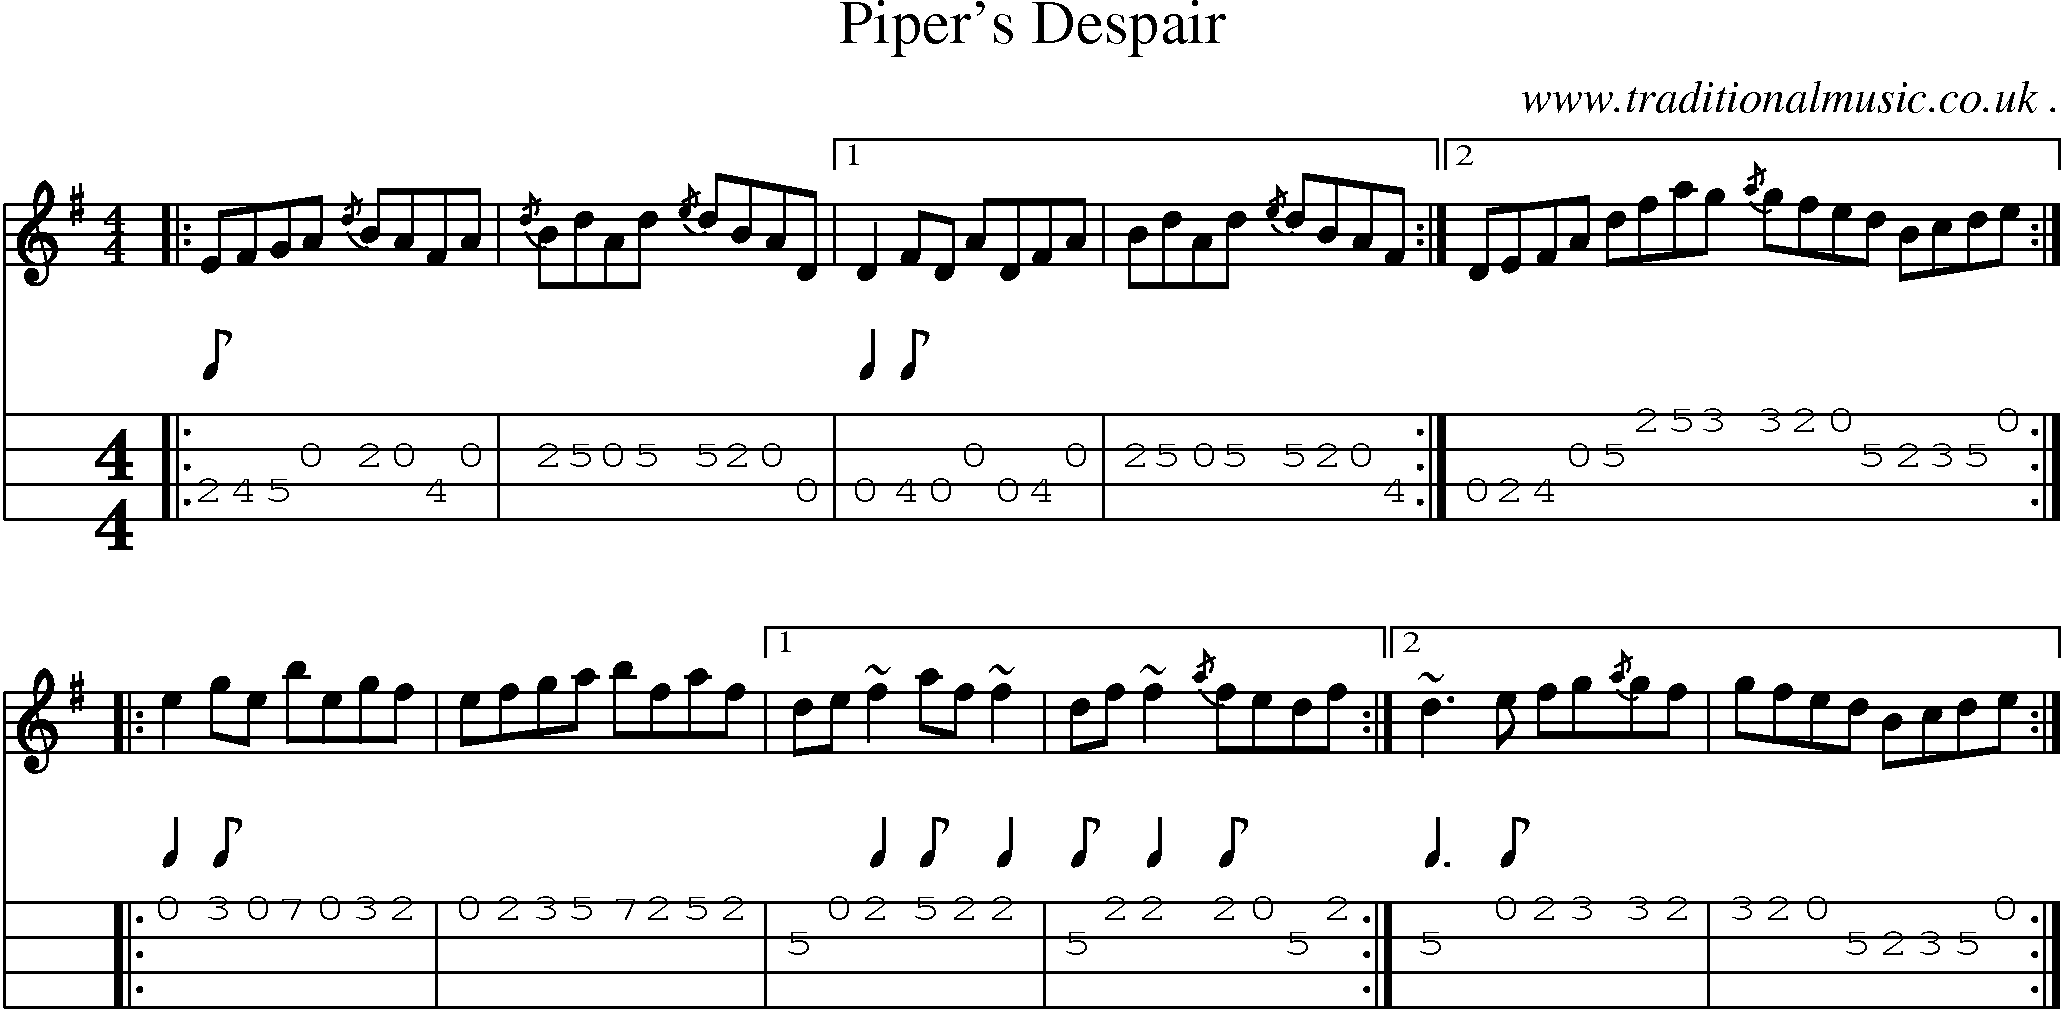 Sheet-music  score, Chords and Mandolin Tabs for Pipers Despair